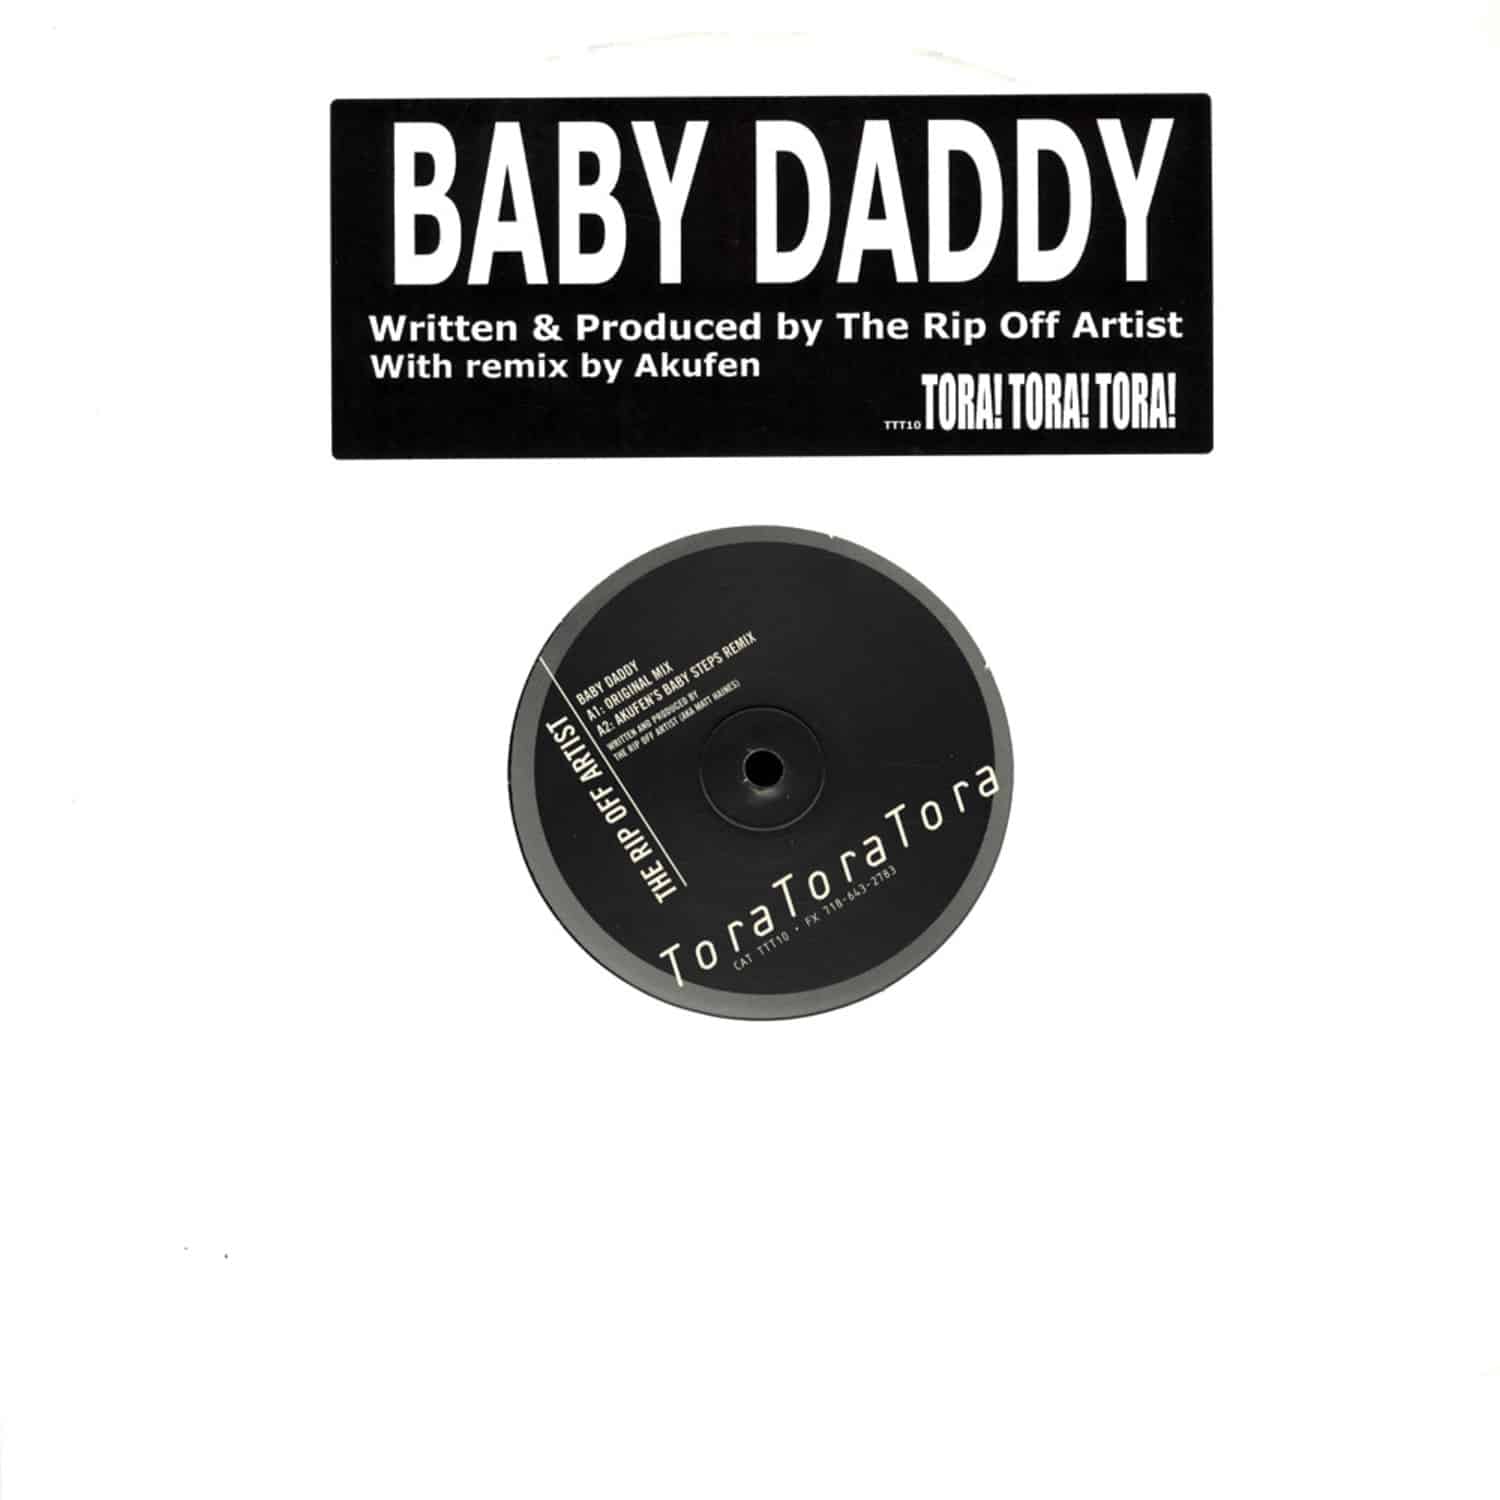 The Rip Off Artist - BABY DADDY